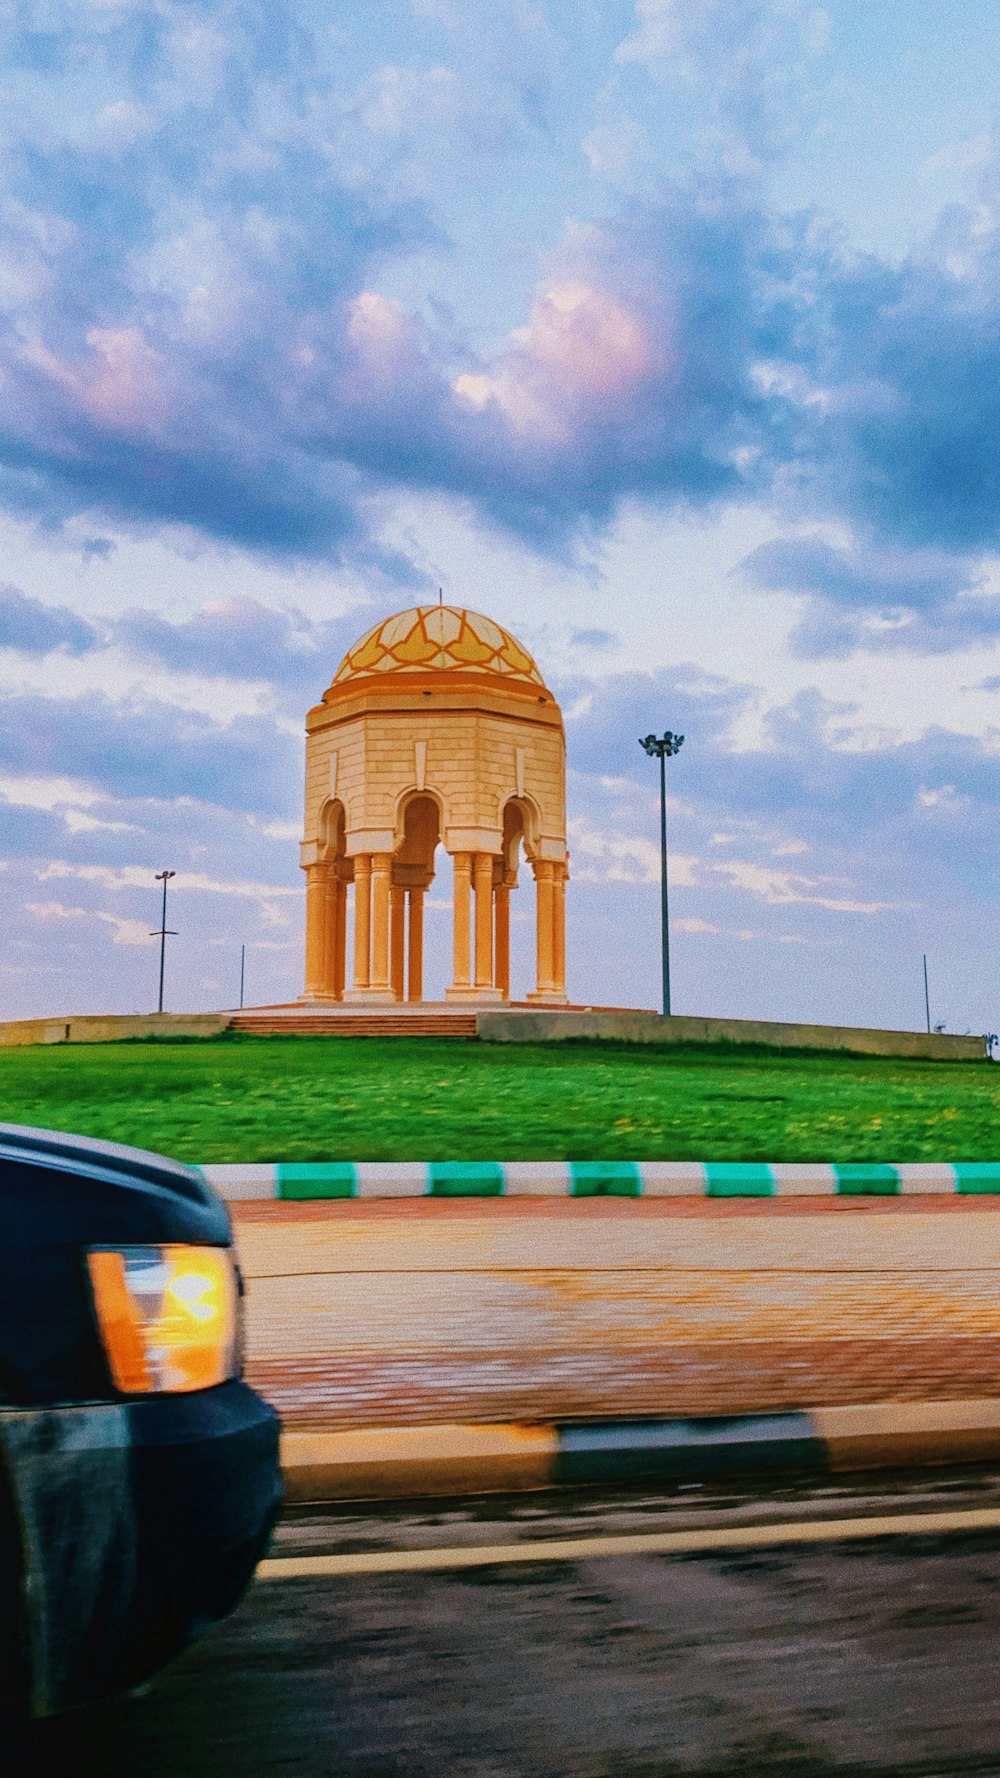 a car driving down a road past a monument